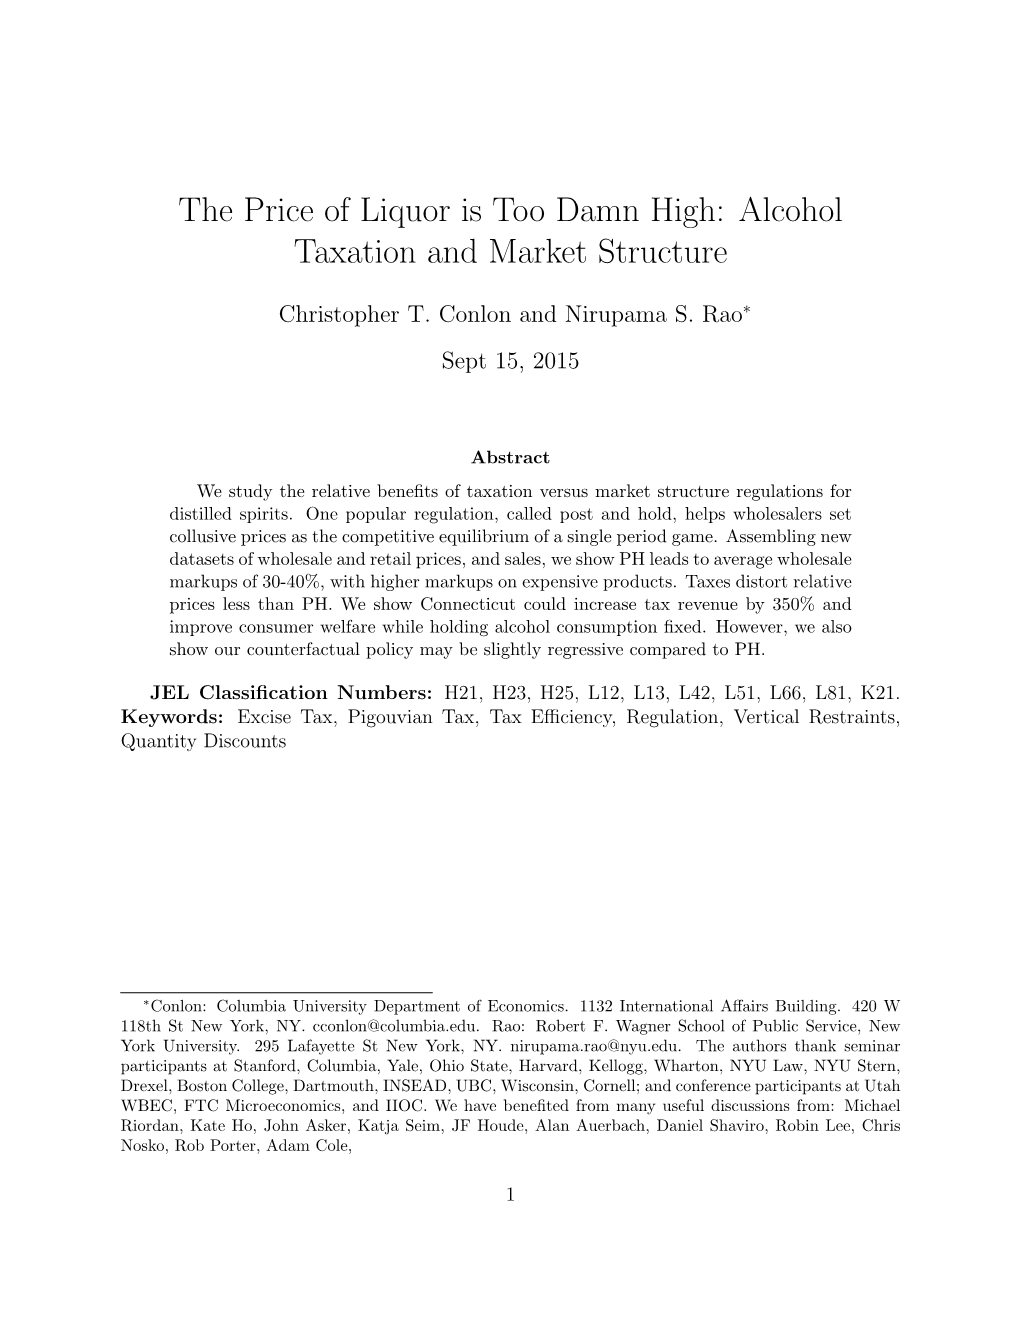 The Price of Liquor Is Too Damn High: Alcohol Taxation and Market Structure